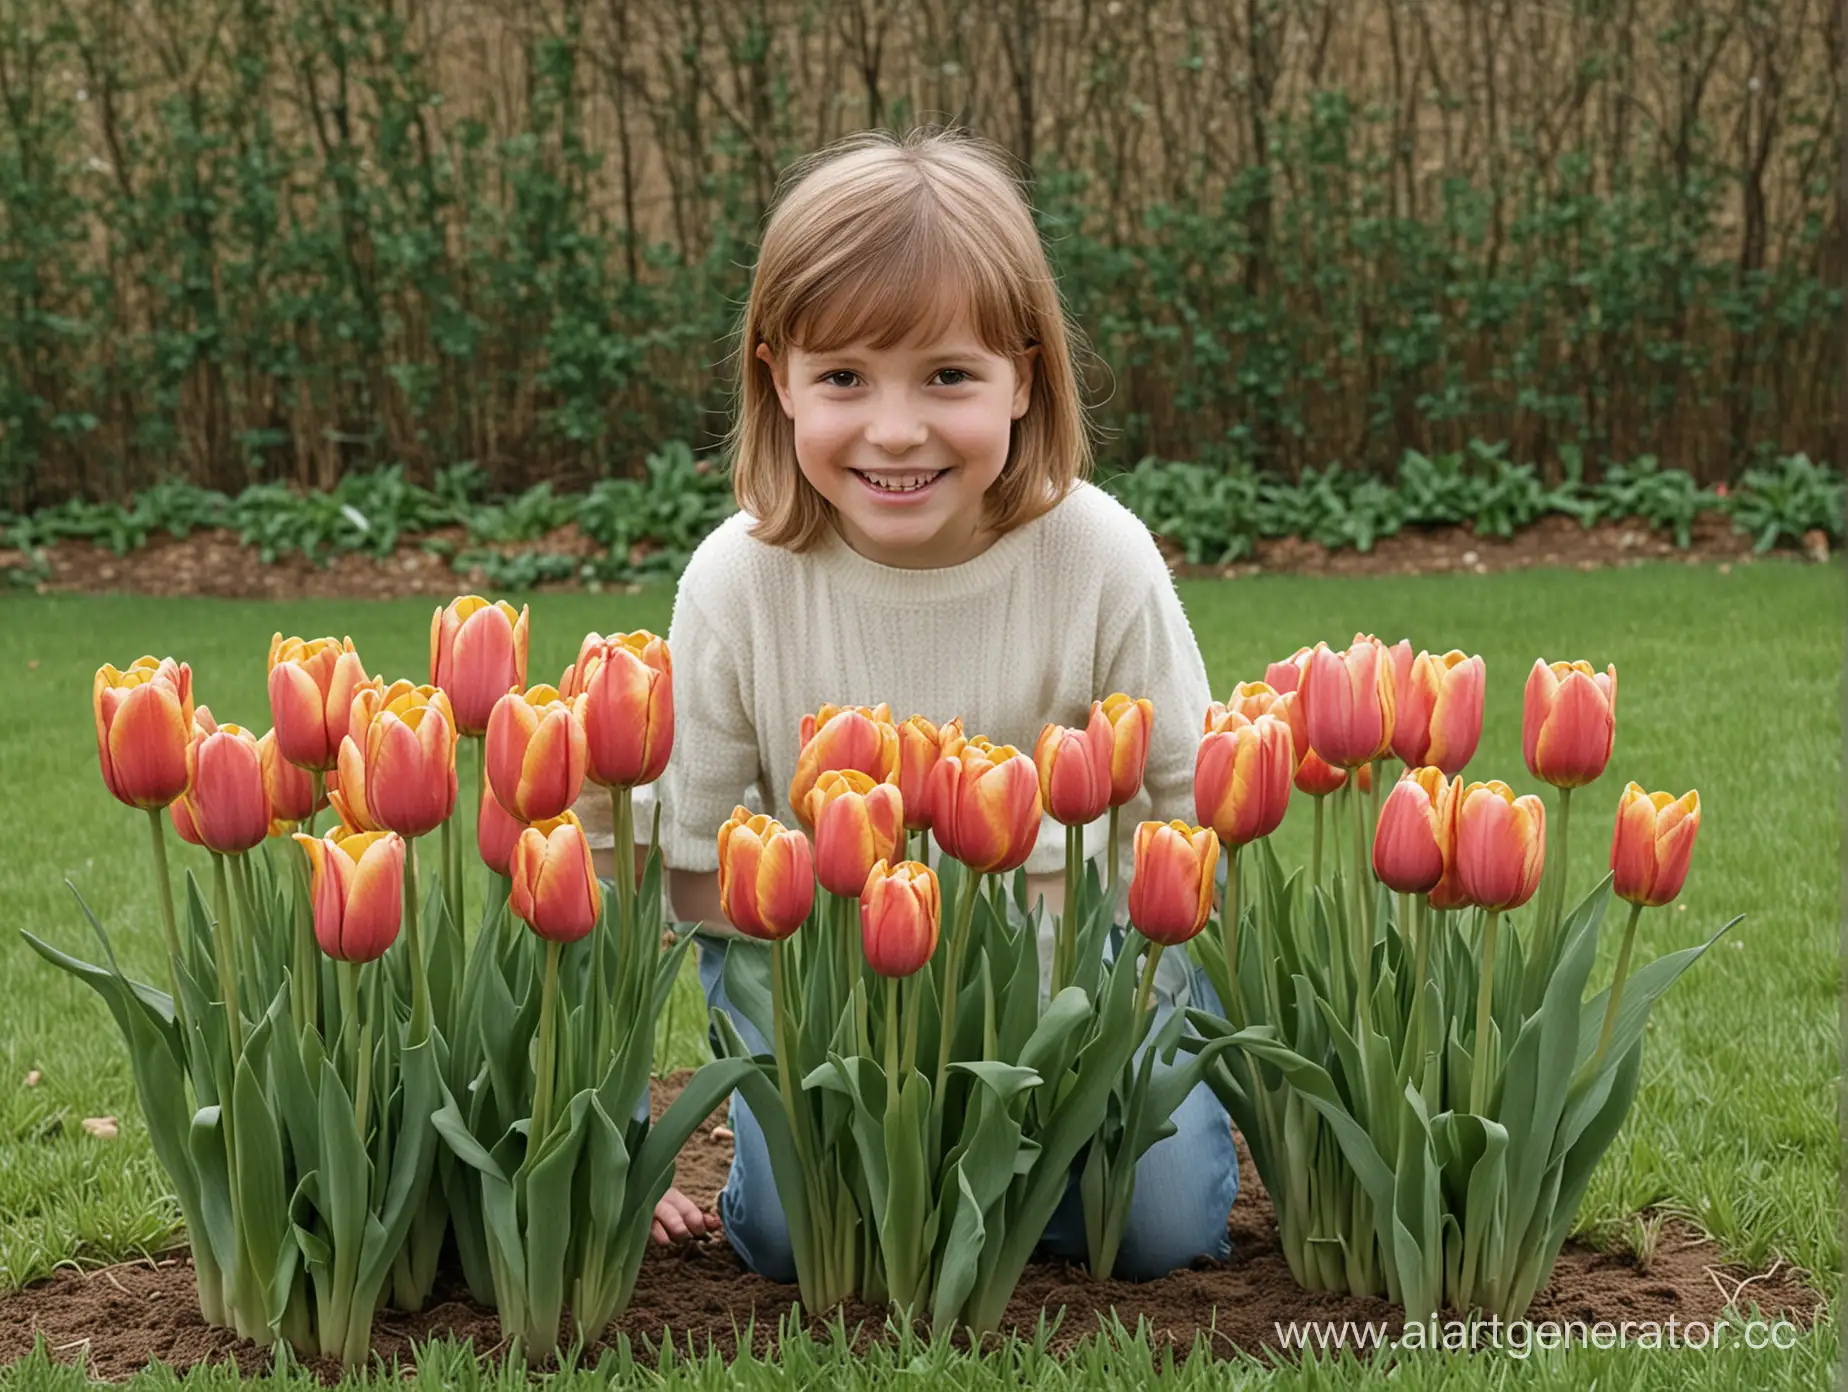 Lisas-Mother-Bringing-Home-First-Tulips-for-Childhood-Memories